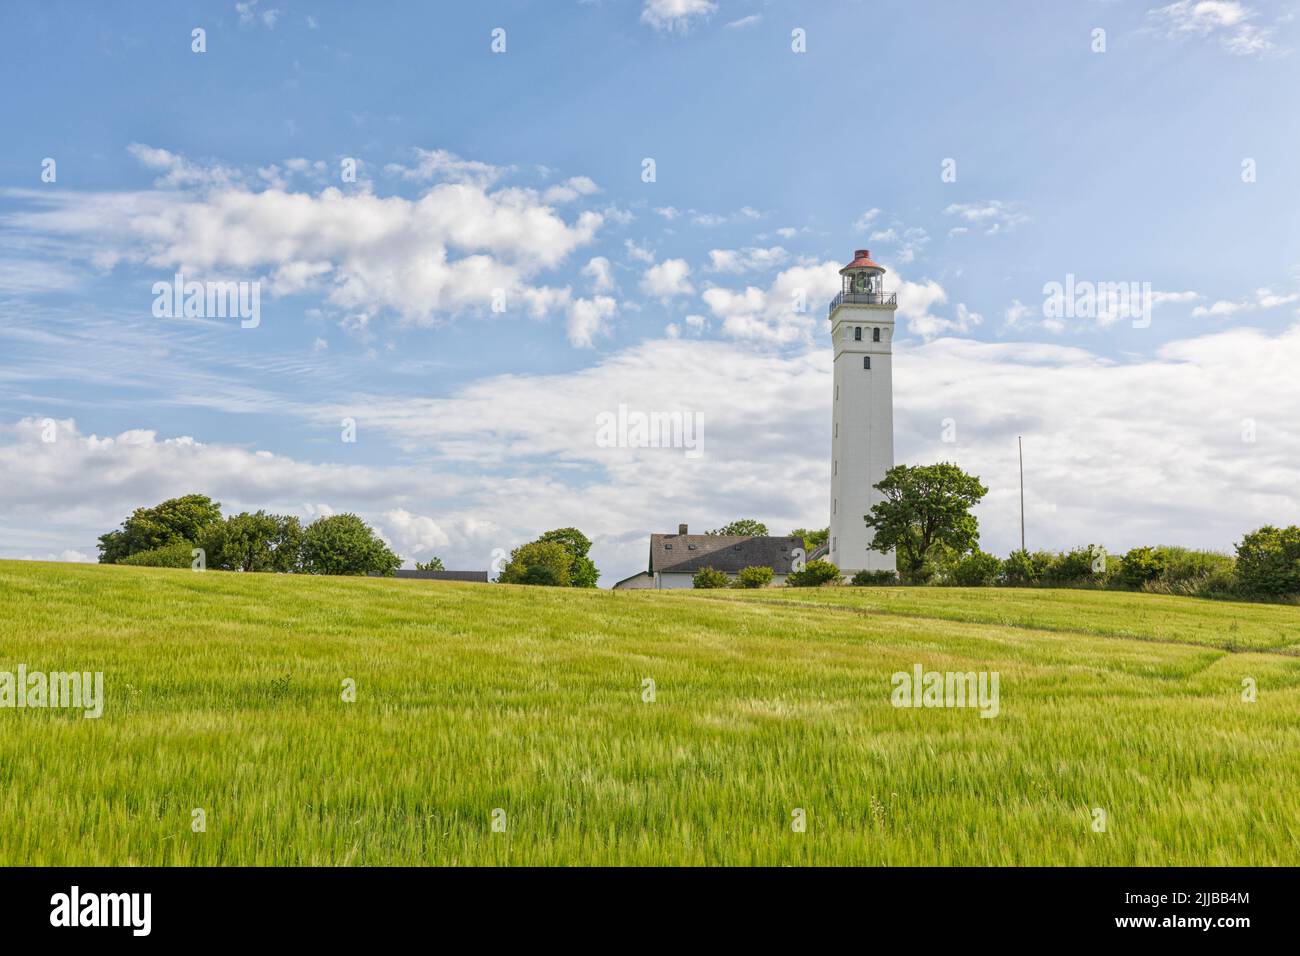 Keldsnor Fyr, lighthouse surrounded by green fields at the southern tip of Langeland, Denmark. Stock Photo